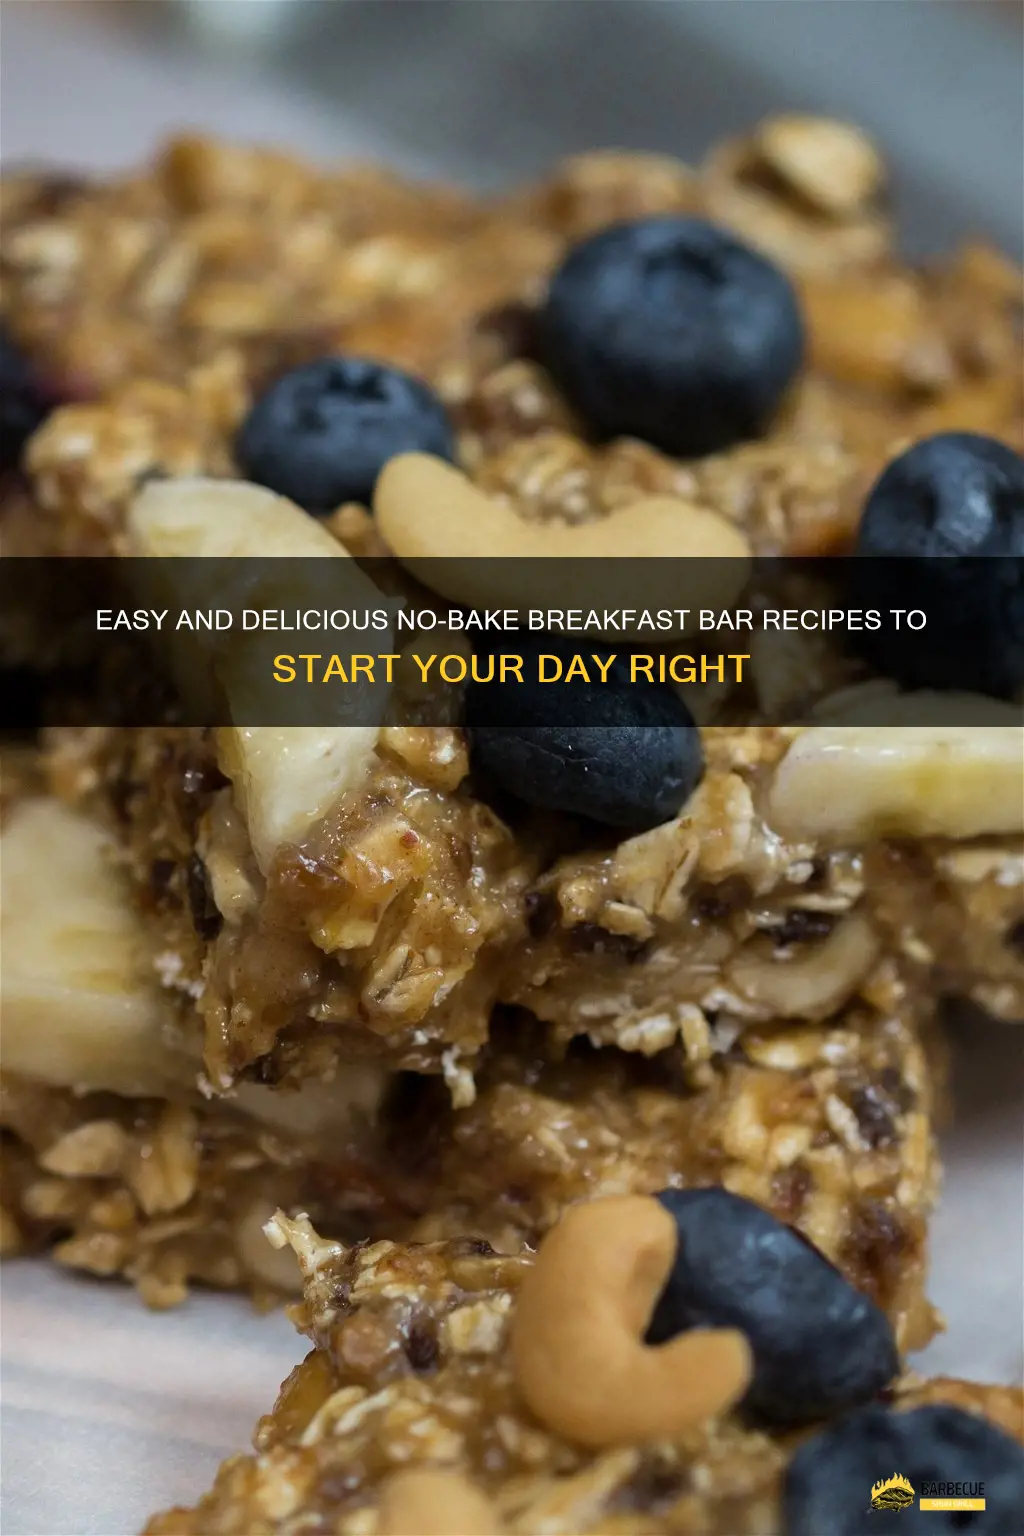 Easy And Delicious No-Bake Breakfast Bar Recipes To Start Your Day ...